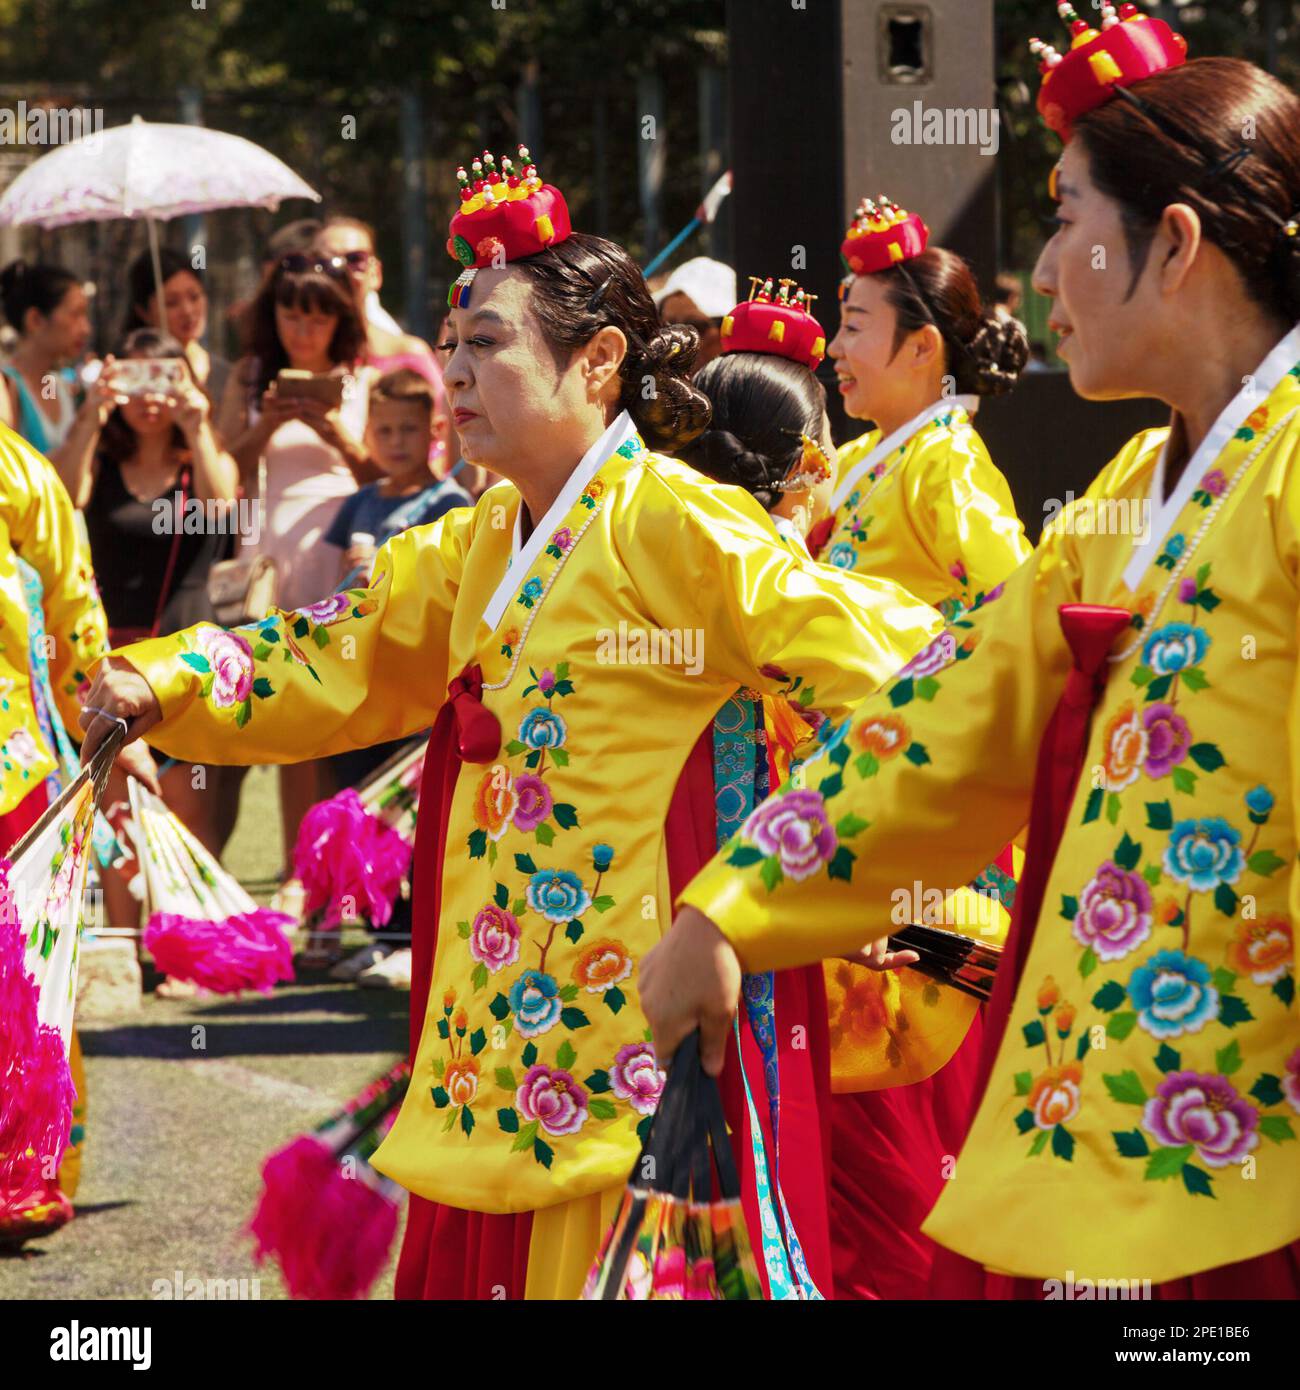 Khabarovsk, Russia - August 13, 2017: Korean traditional dancers. Old ladies wearing colorful yellow and pink dresses, dancing Buchaechum or fan dance Stock Photo